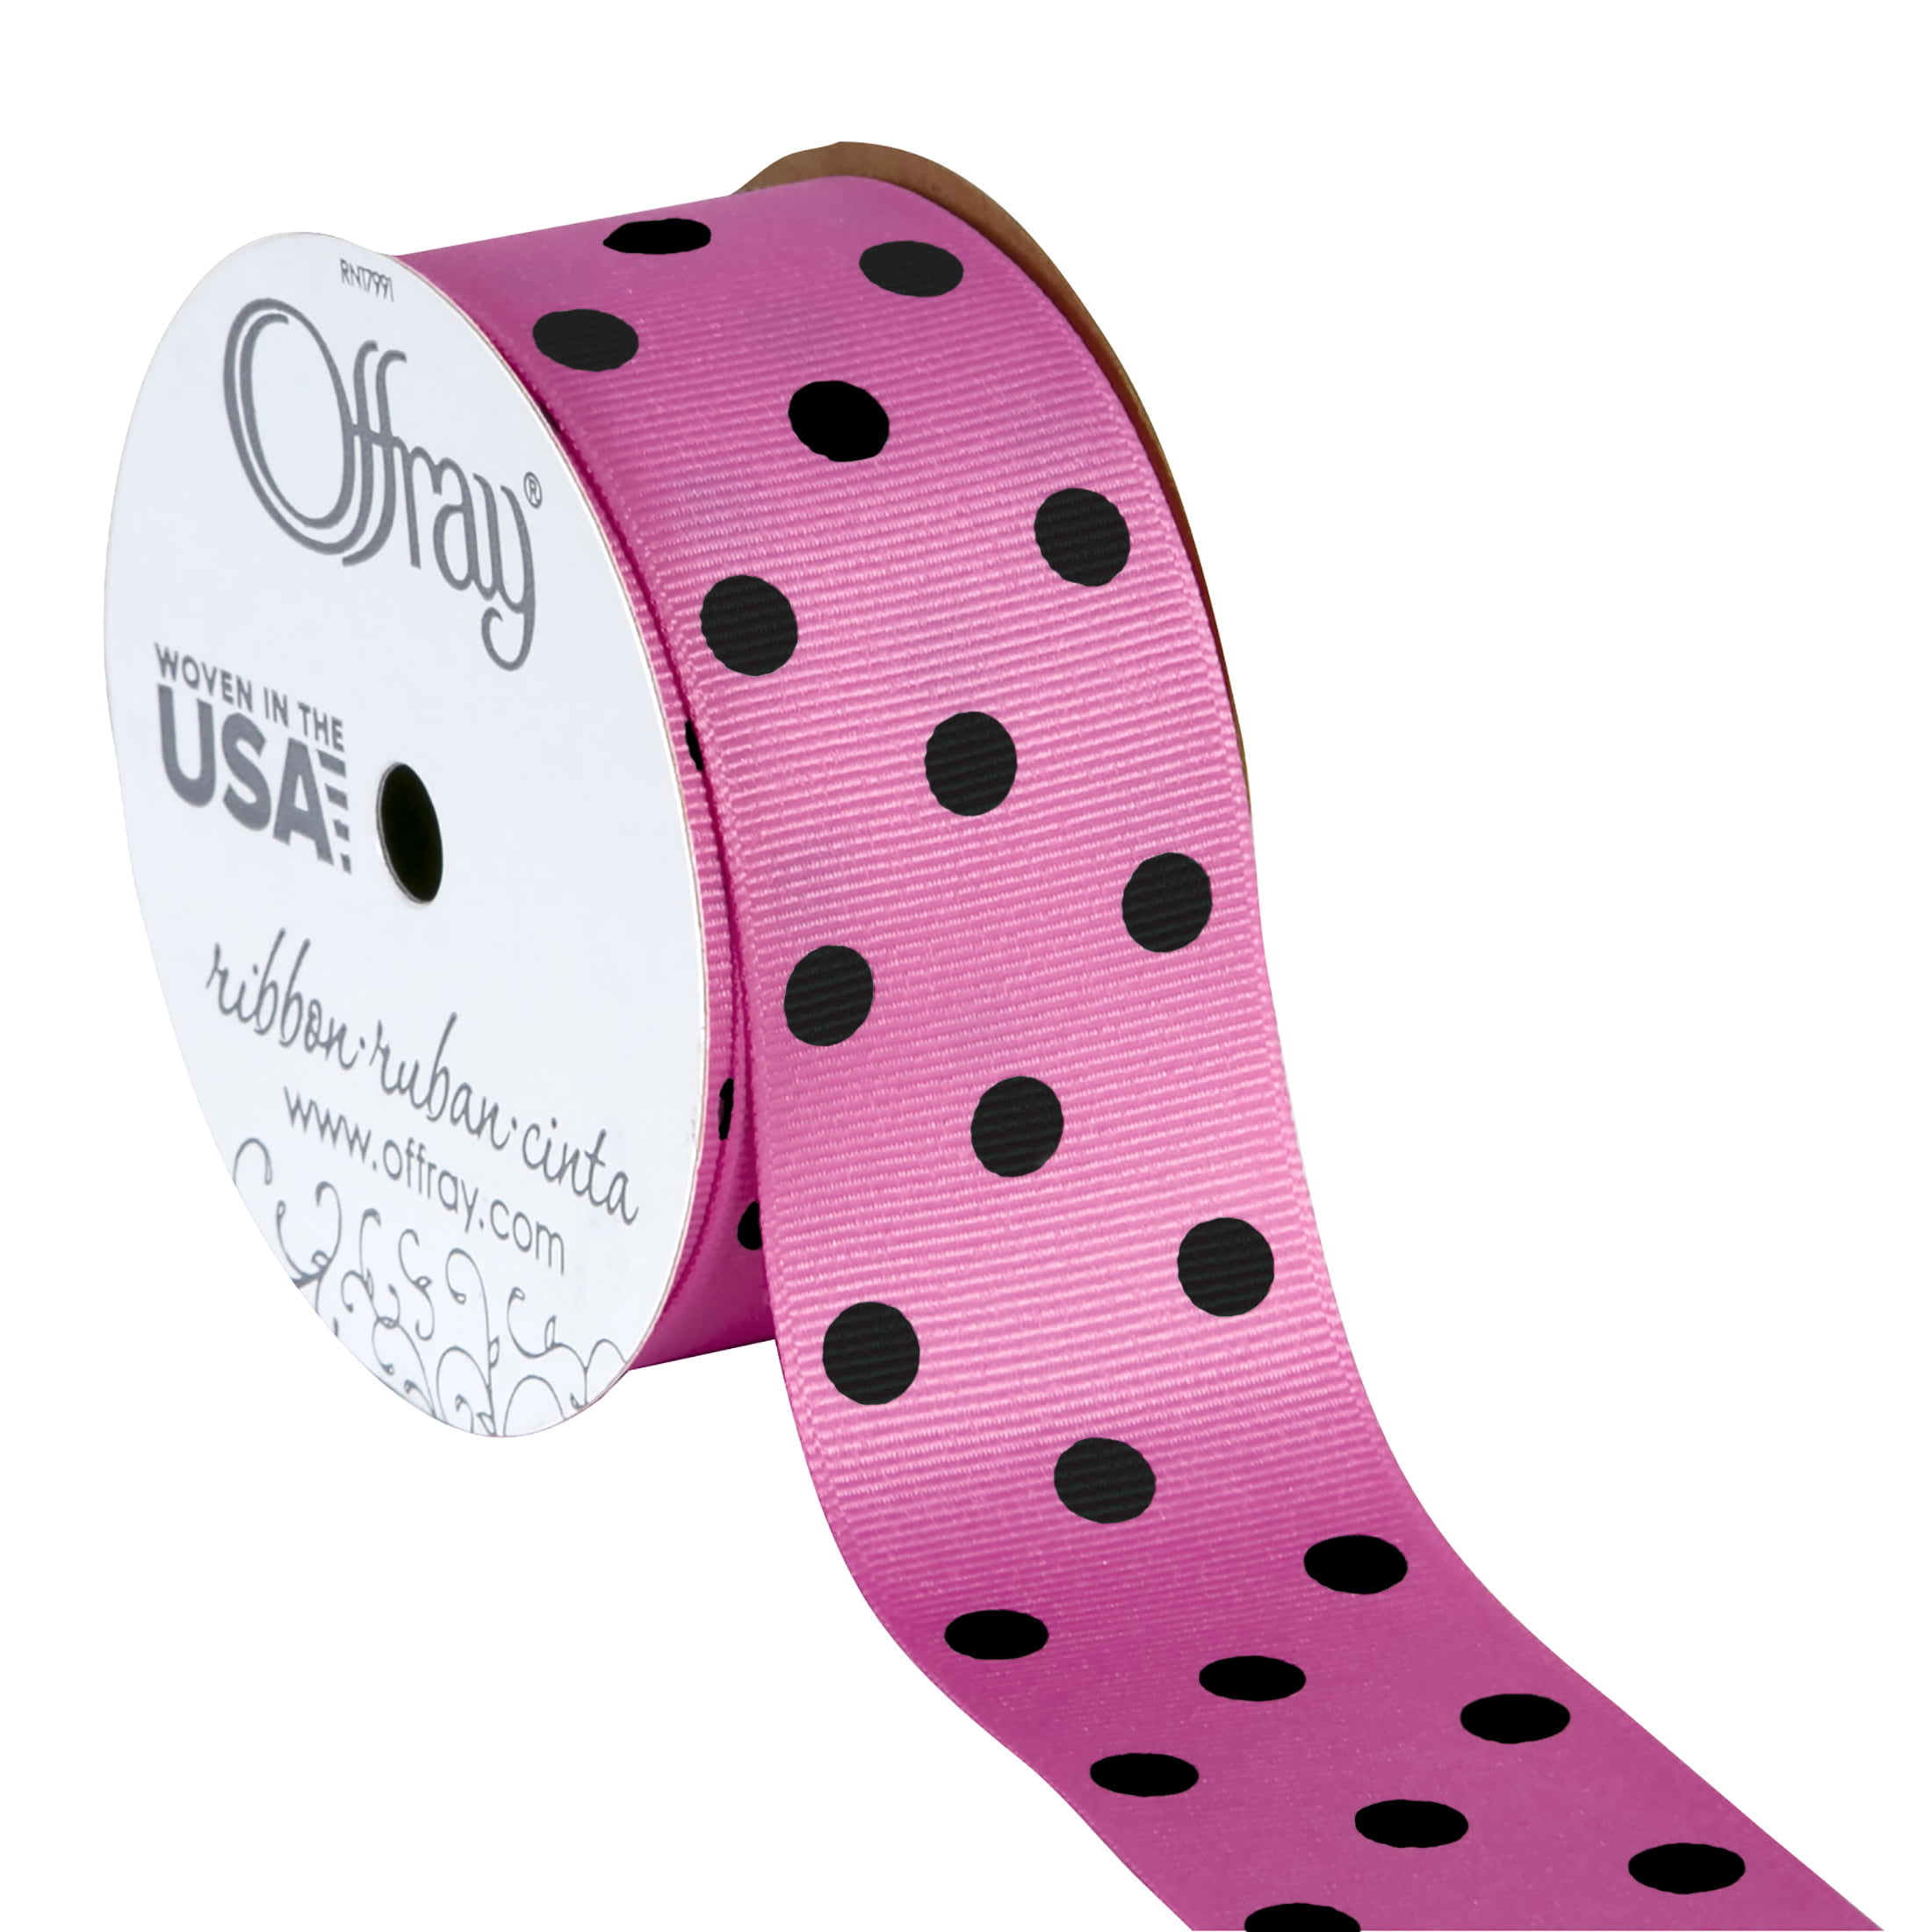 Offray Ribbon, Black 1 1/2 inch Double Face Satin Polyester Ribbon, 12 feet